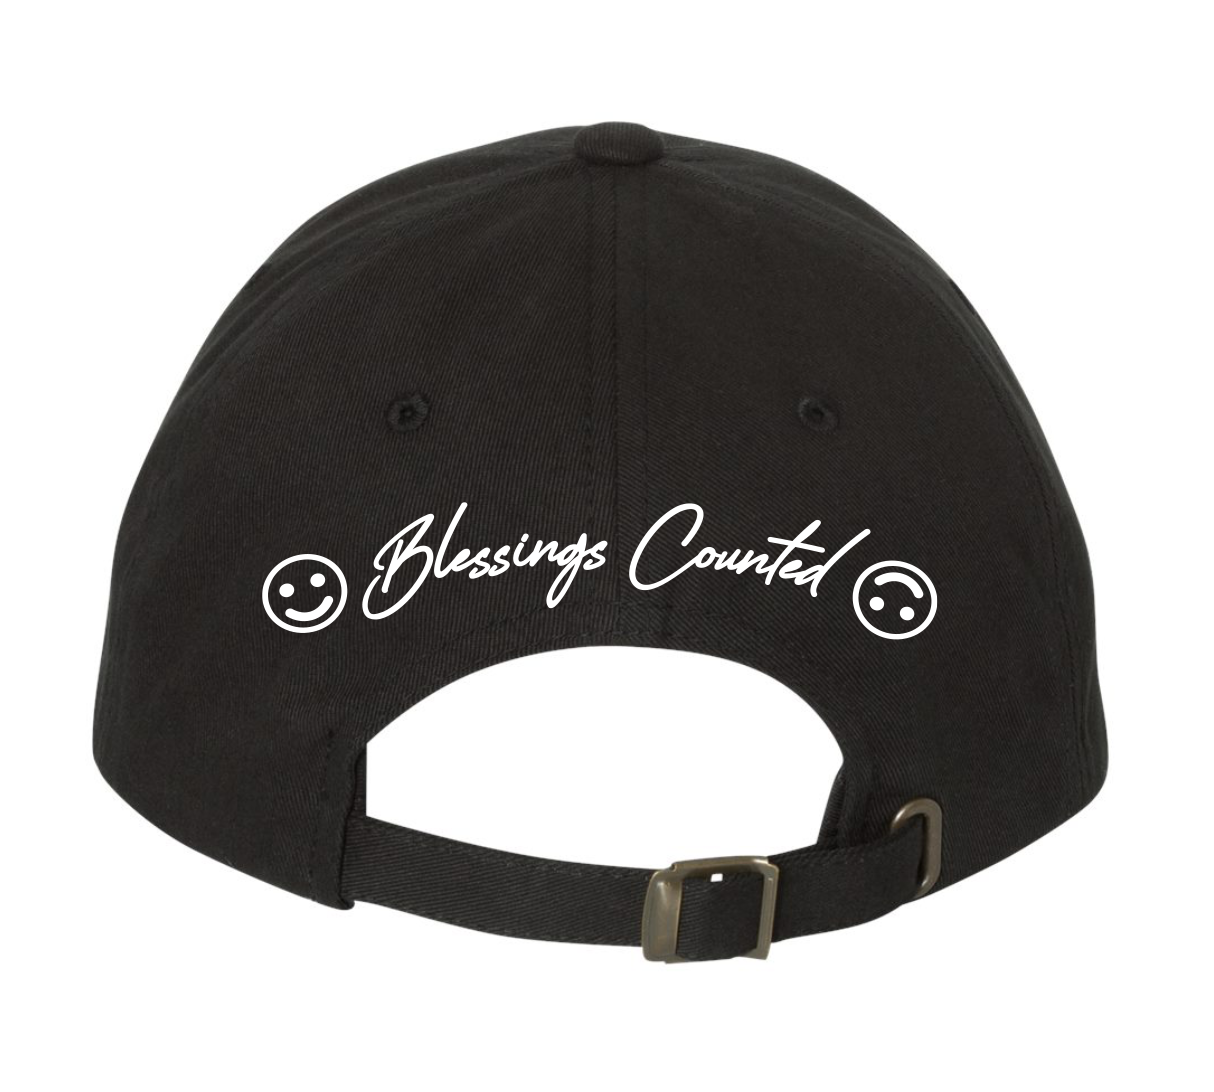 DG Smile "Blessings Counted" Dad Hats